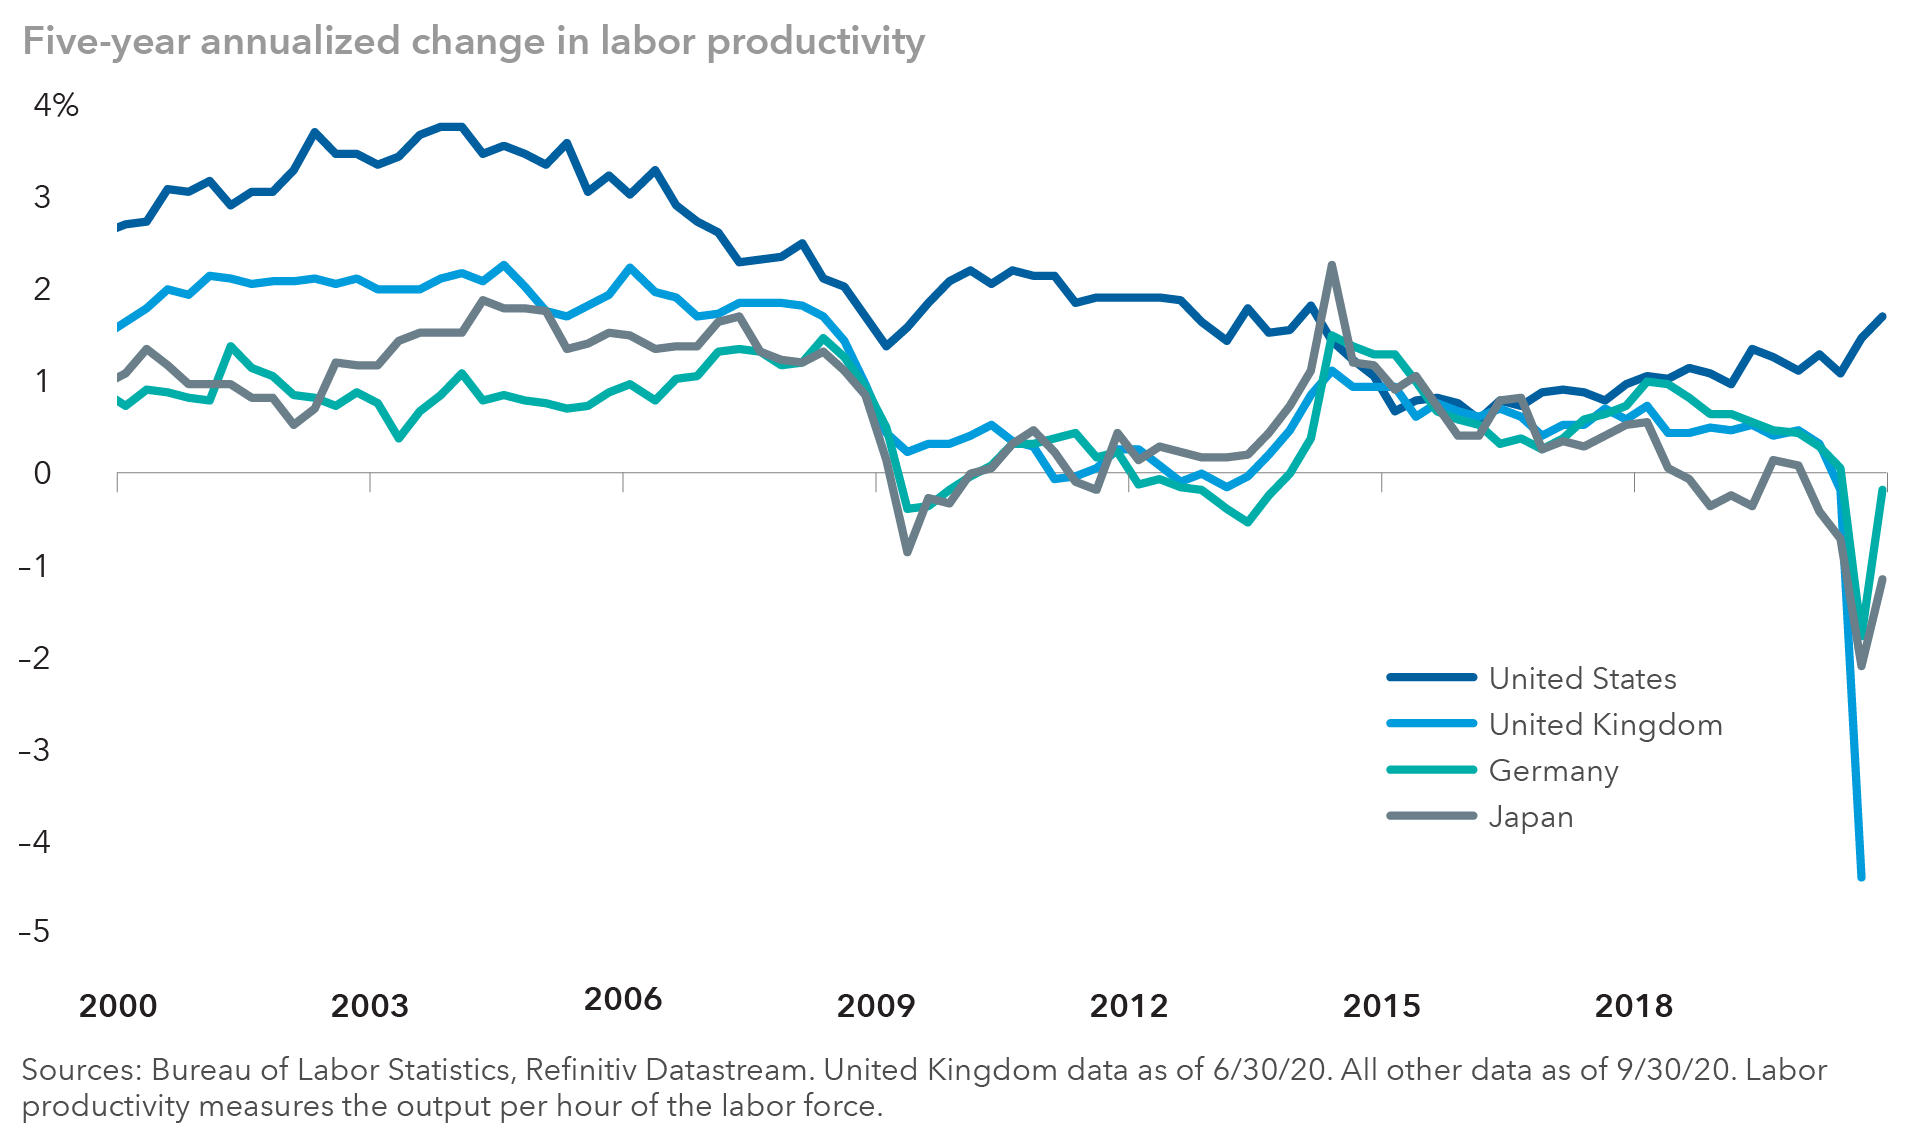 Line chart displays the five-year annualized change in labor productivity in the U.S., United Kingdom, Germany and Japan from the first quarter of 2000 through the third quarter of 2020 for all countries except the United Kingdom, for which the data runs through the second quarter of 2020. Labor productivity measures the output per hour of the labor force. The percentage change in productivity was highest in the U.S. until the first quarter of 2014, when Germany and Japan were both higher. The lead changed hands among the four countries until the third quarter of 2016, when the U.S. took a lead that it maintained in the remaining data. Productivity growth was negative in all countries except the U.S. in the second quarter of 2020. In the third quarter of 2020, Germany and Japan were negative, while no data was available for the United Kingdom. Sources: Bureau of Labor Statistics, Refinitiv Datastream.